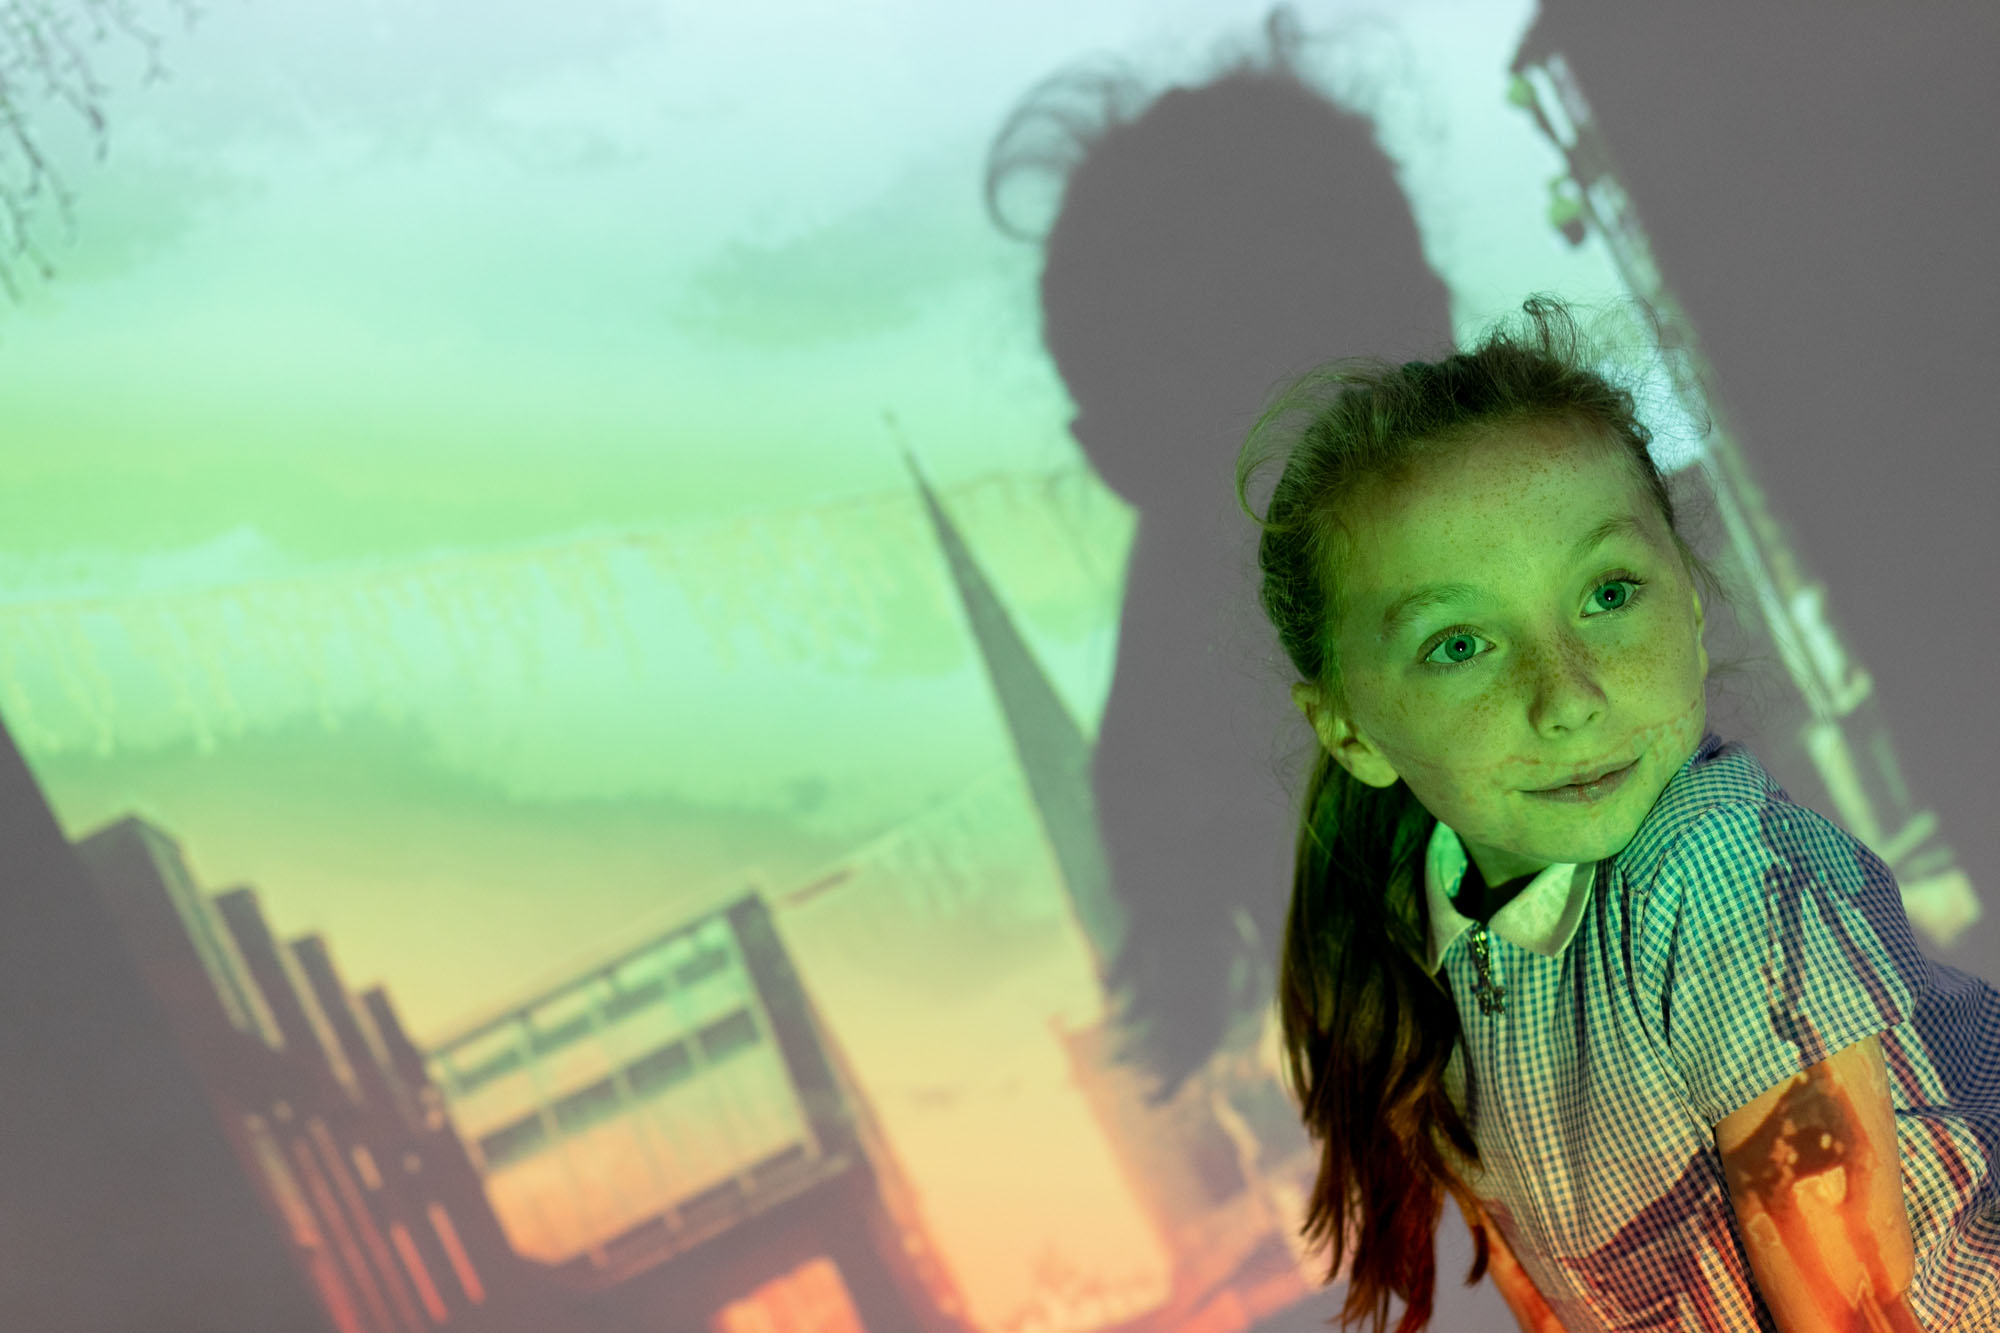 A girl in school uniform photographed in front of a photo of a street scene projected on her and a wall behind her.